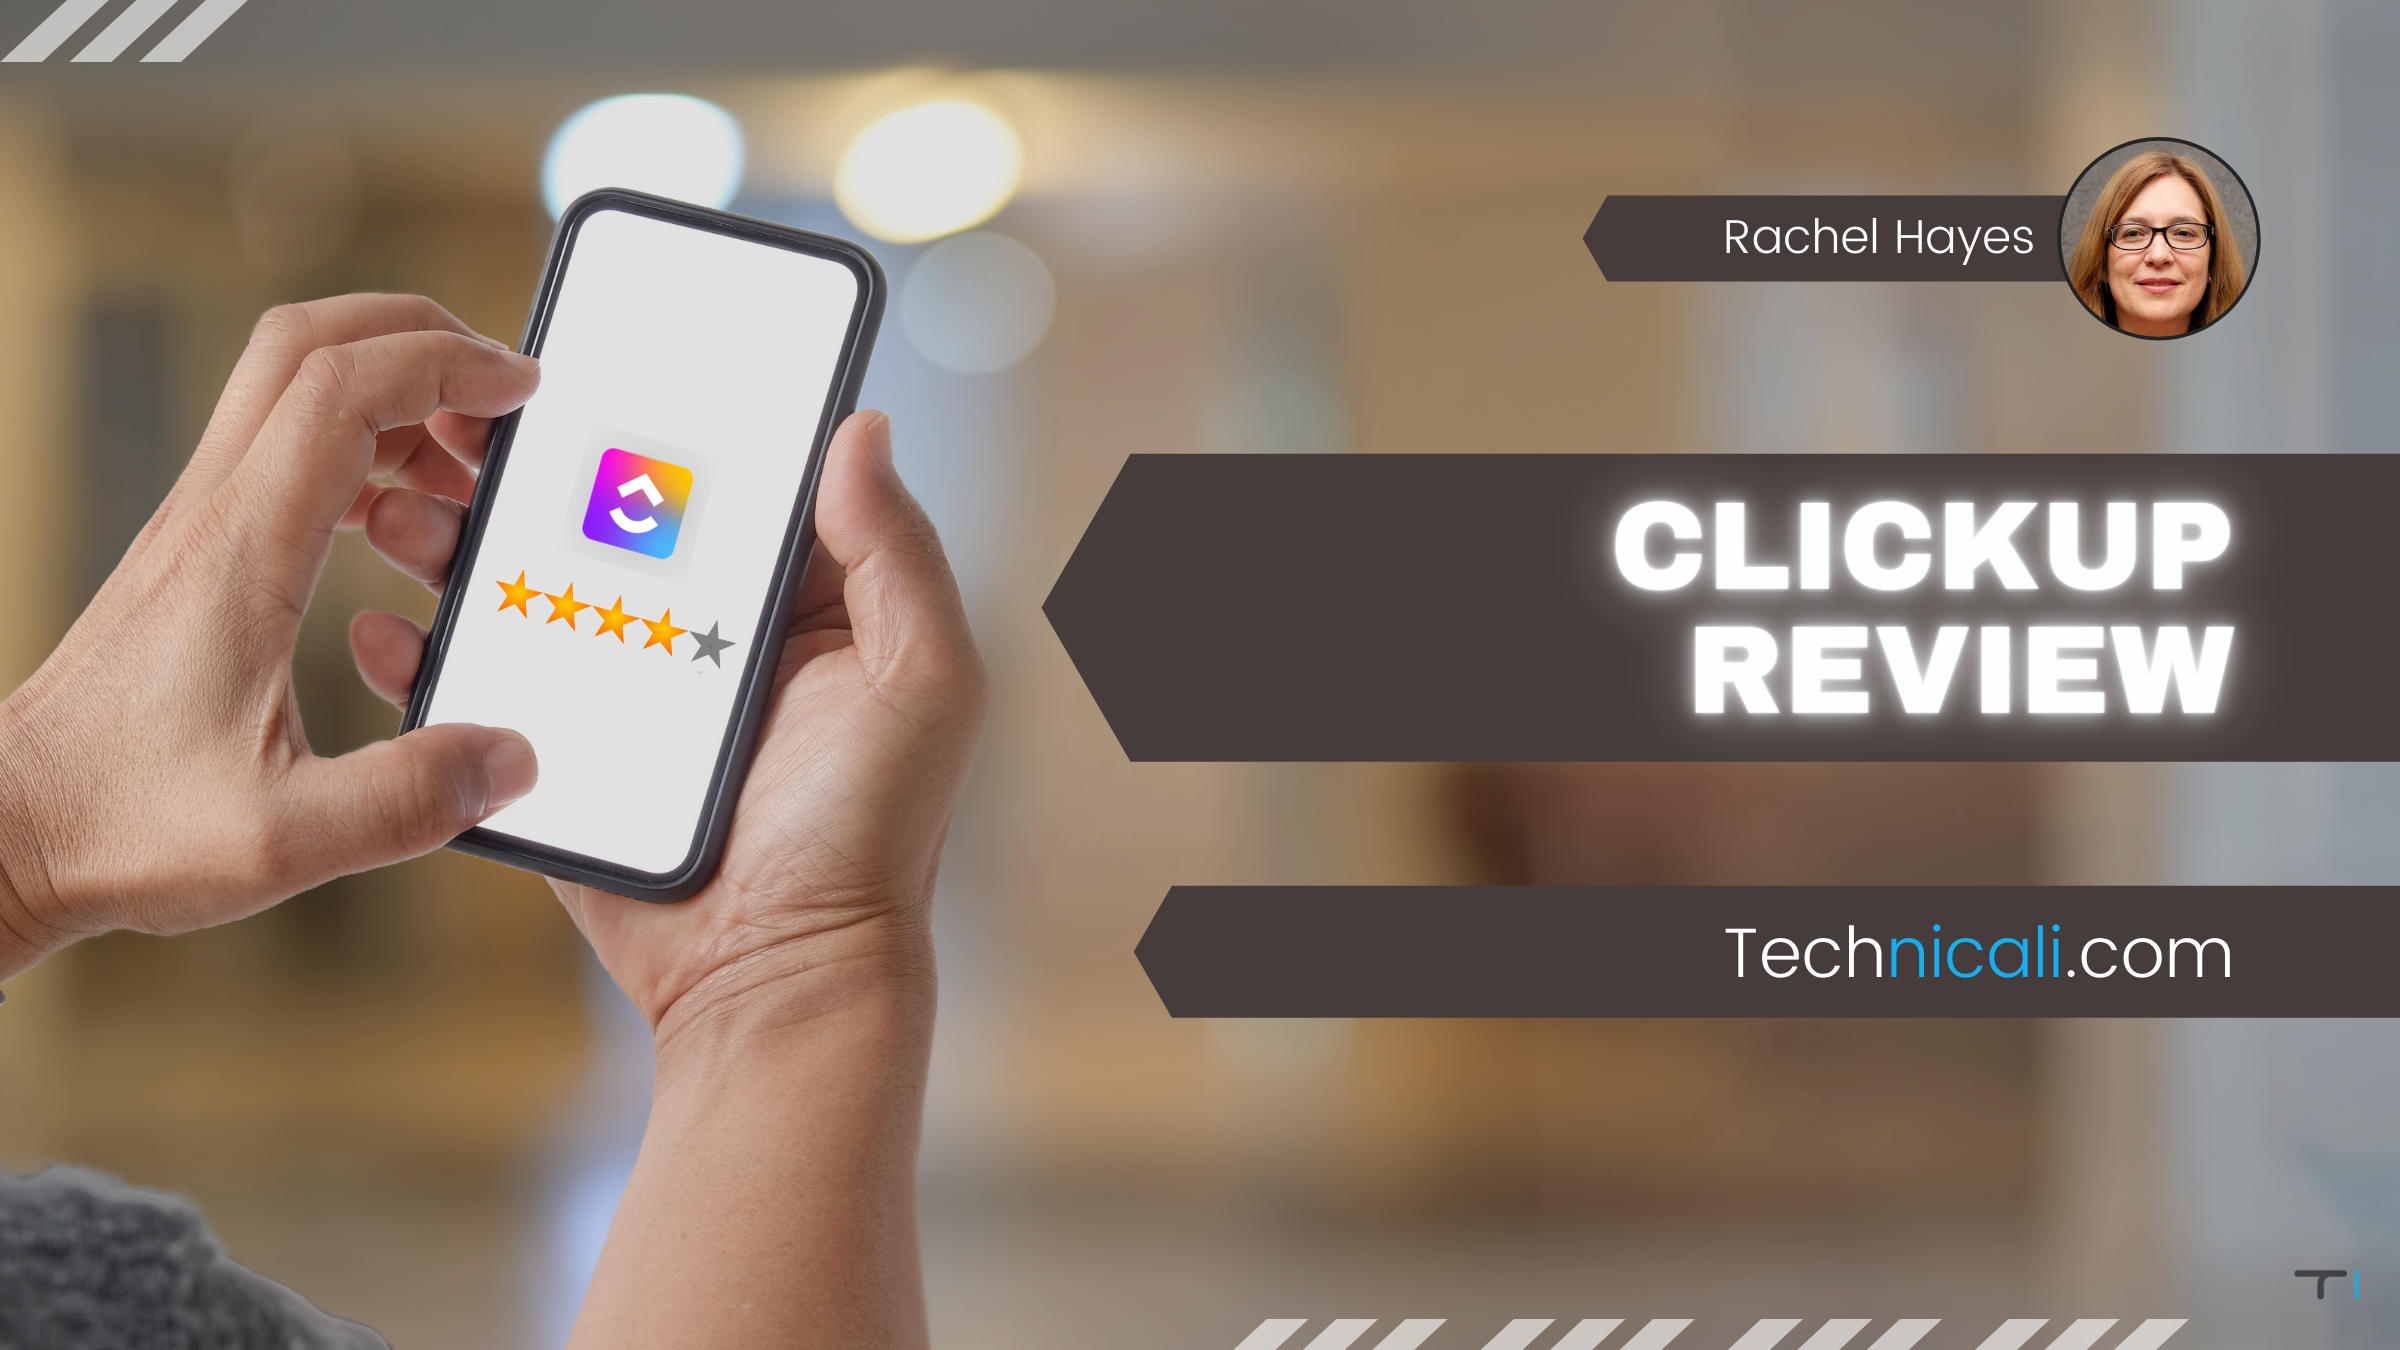 ClickUp Review Featured Image - Hand Holding Mobile with app logo